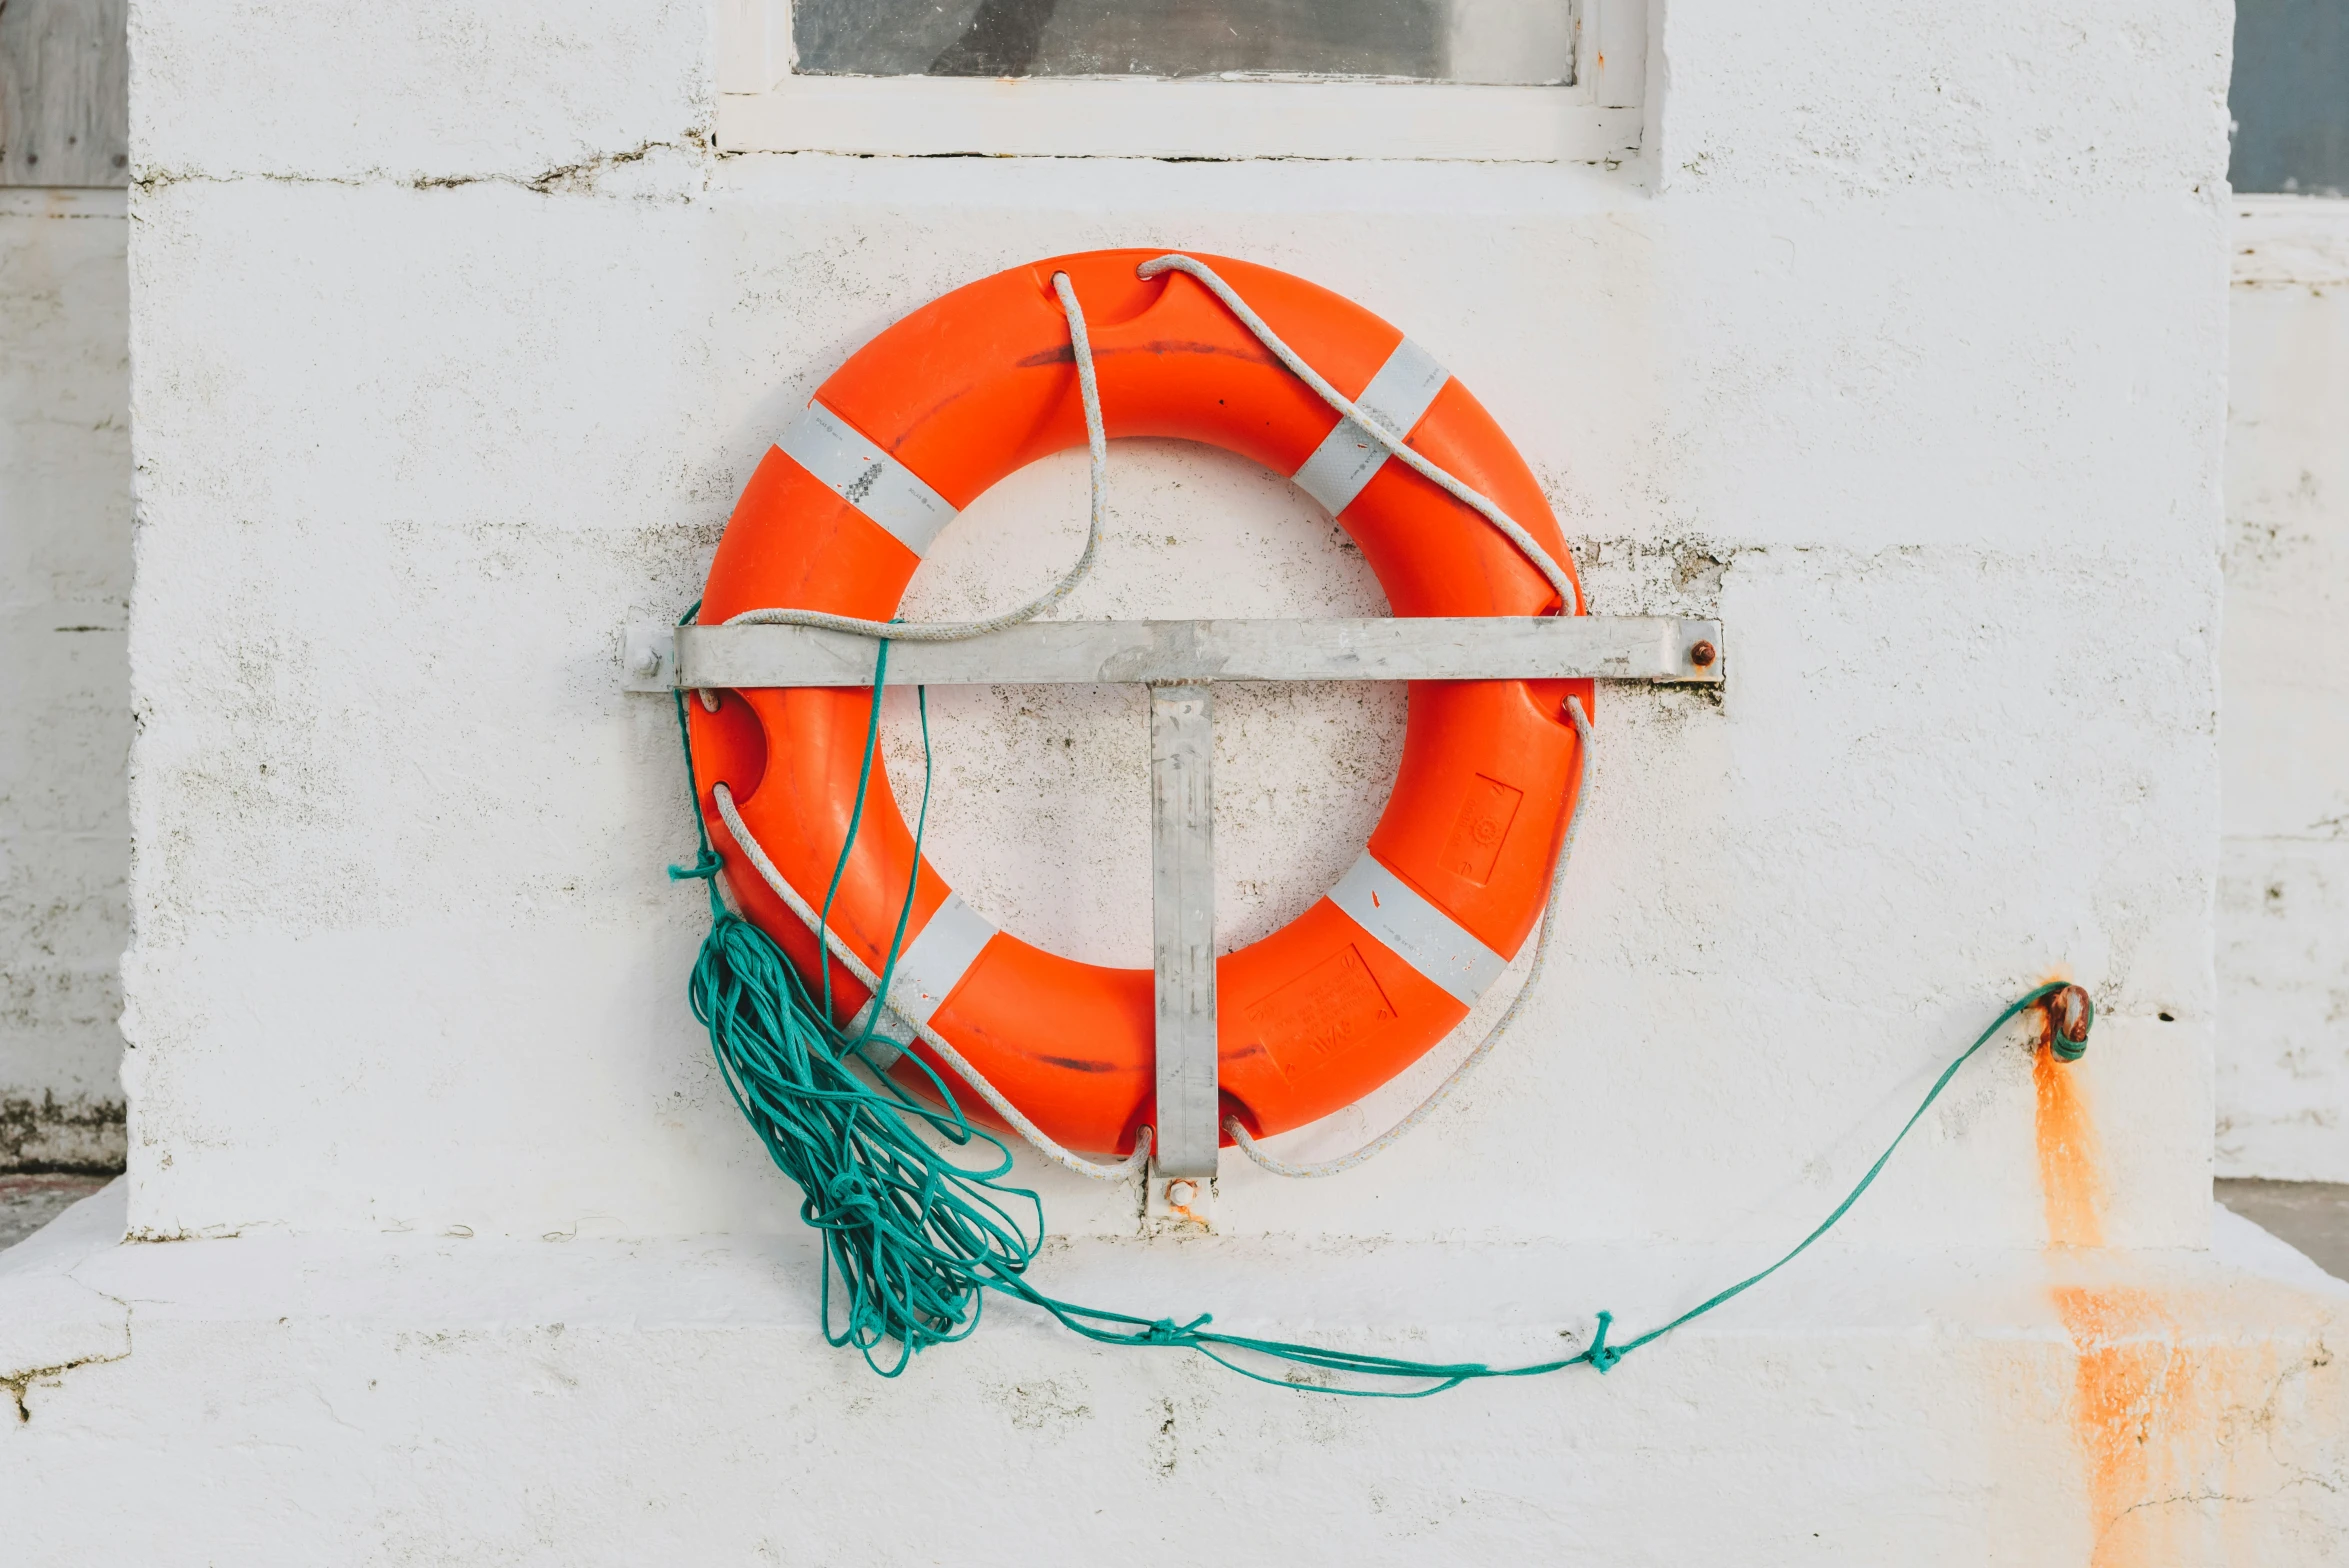 a life raft is attached to the side of a wall